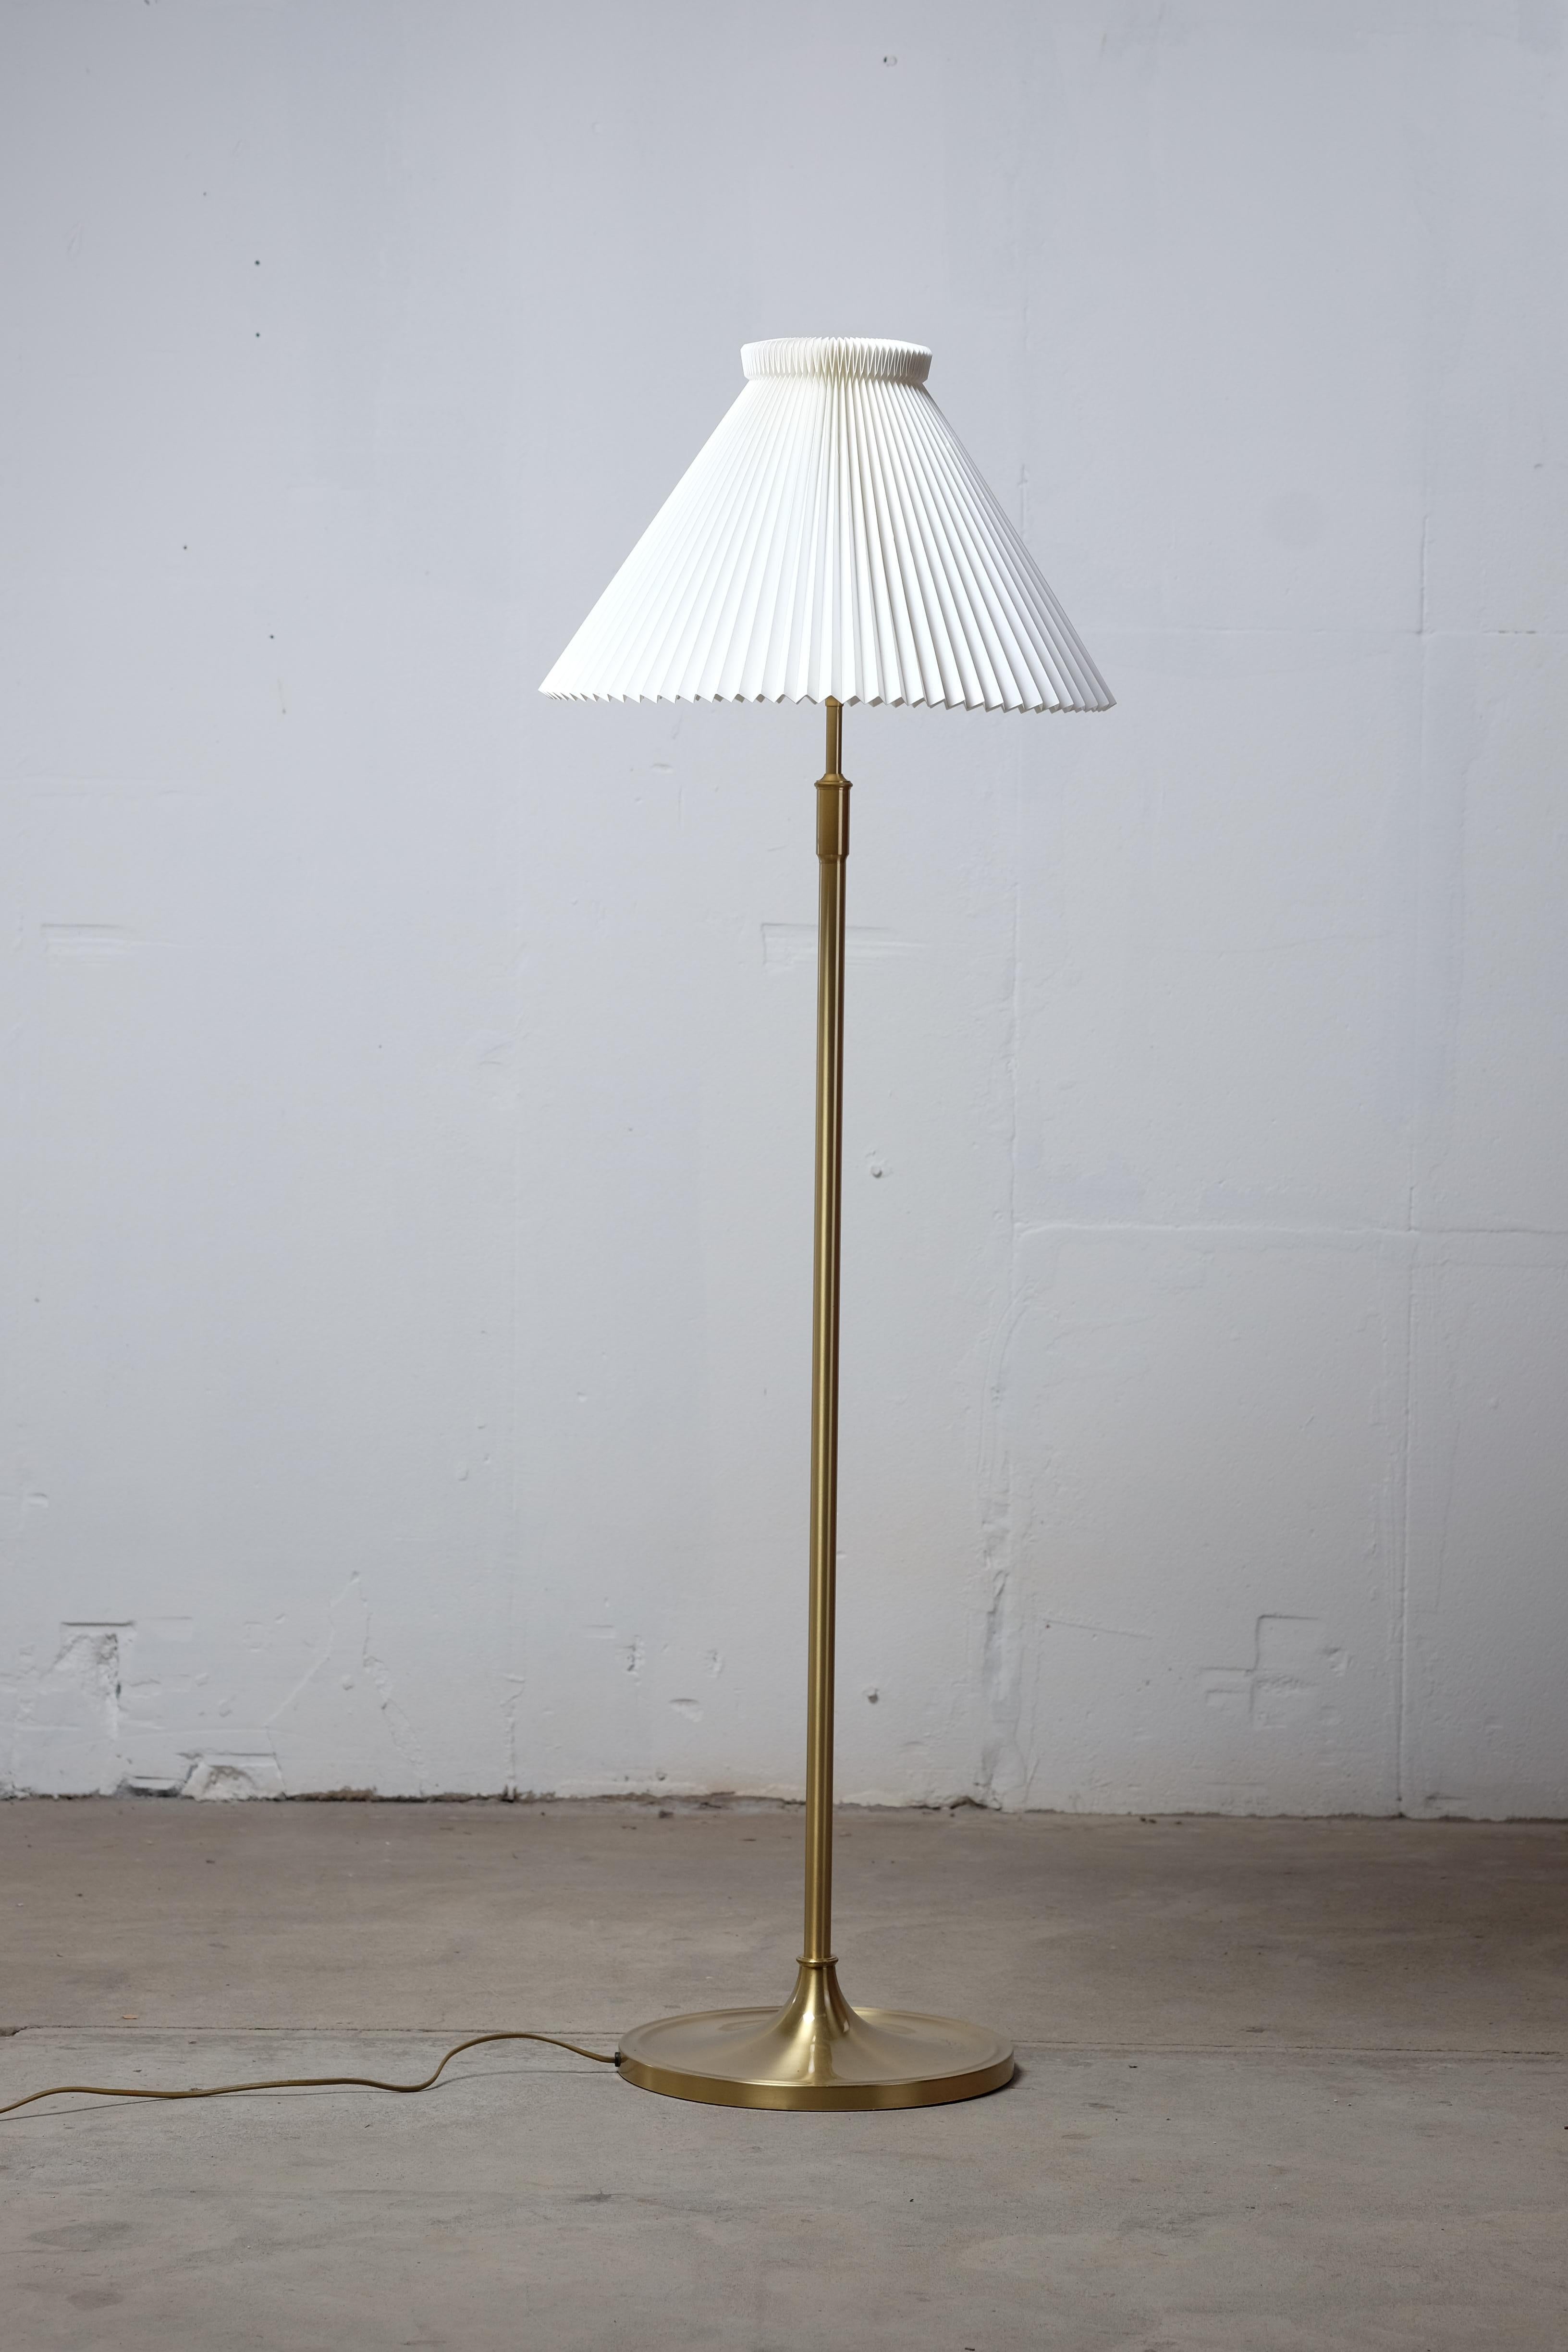 Lovely floor lamp in brass designed by Aage Petersen for Le Klint. The lamp is adjustable in height.
Great piece there will suit the most modern environments. The lamp provides a great light and it isn't hard to find a spot for this beauty.
The